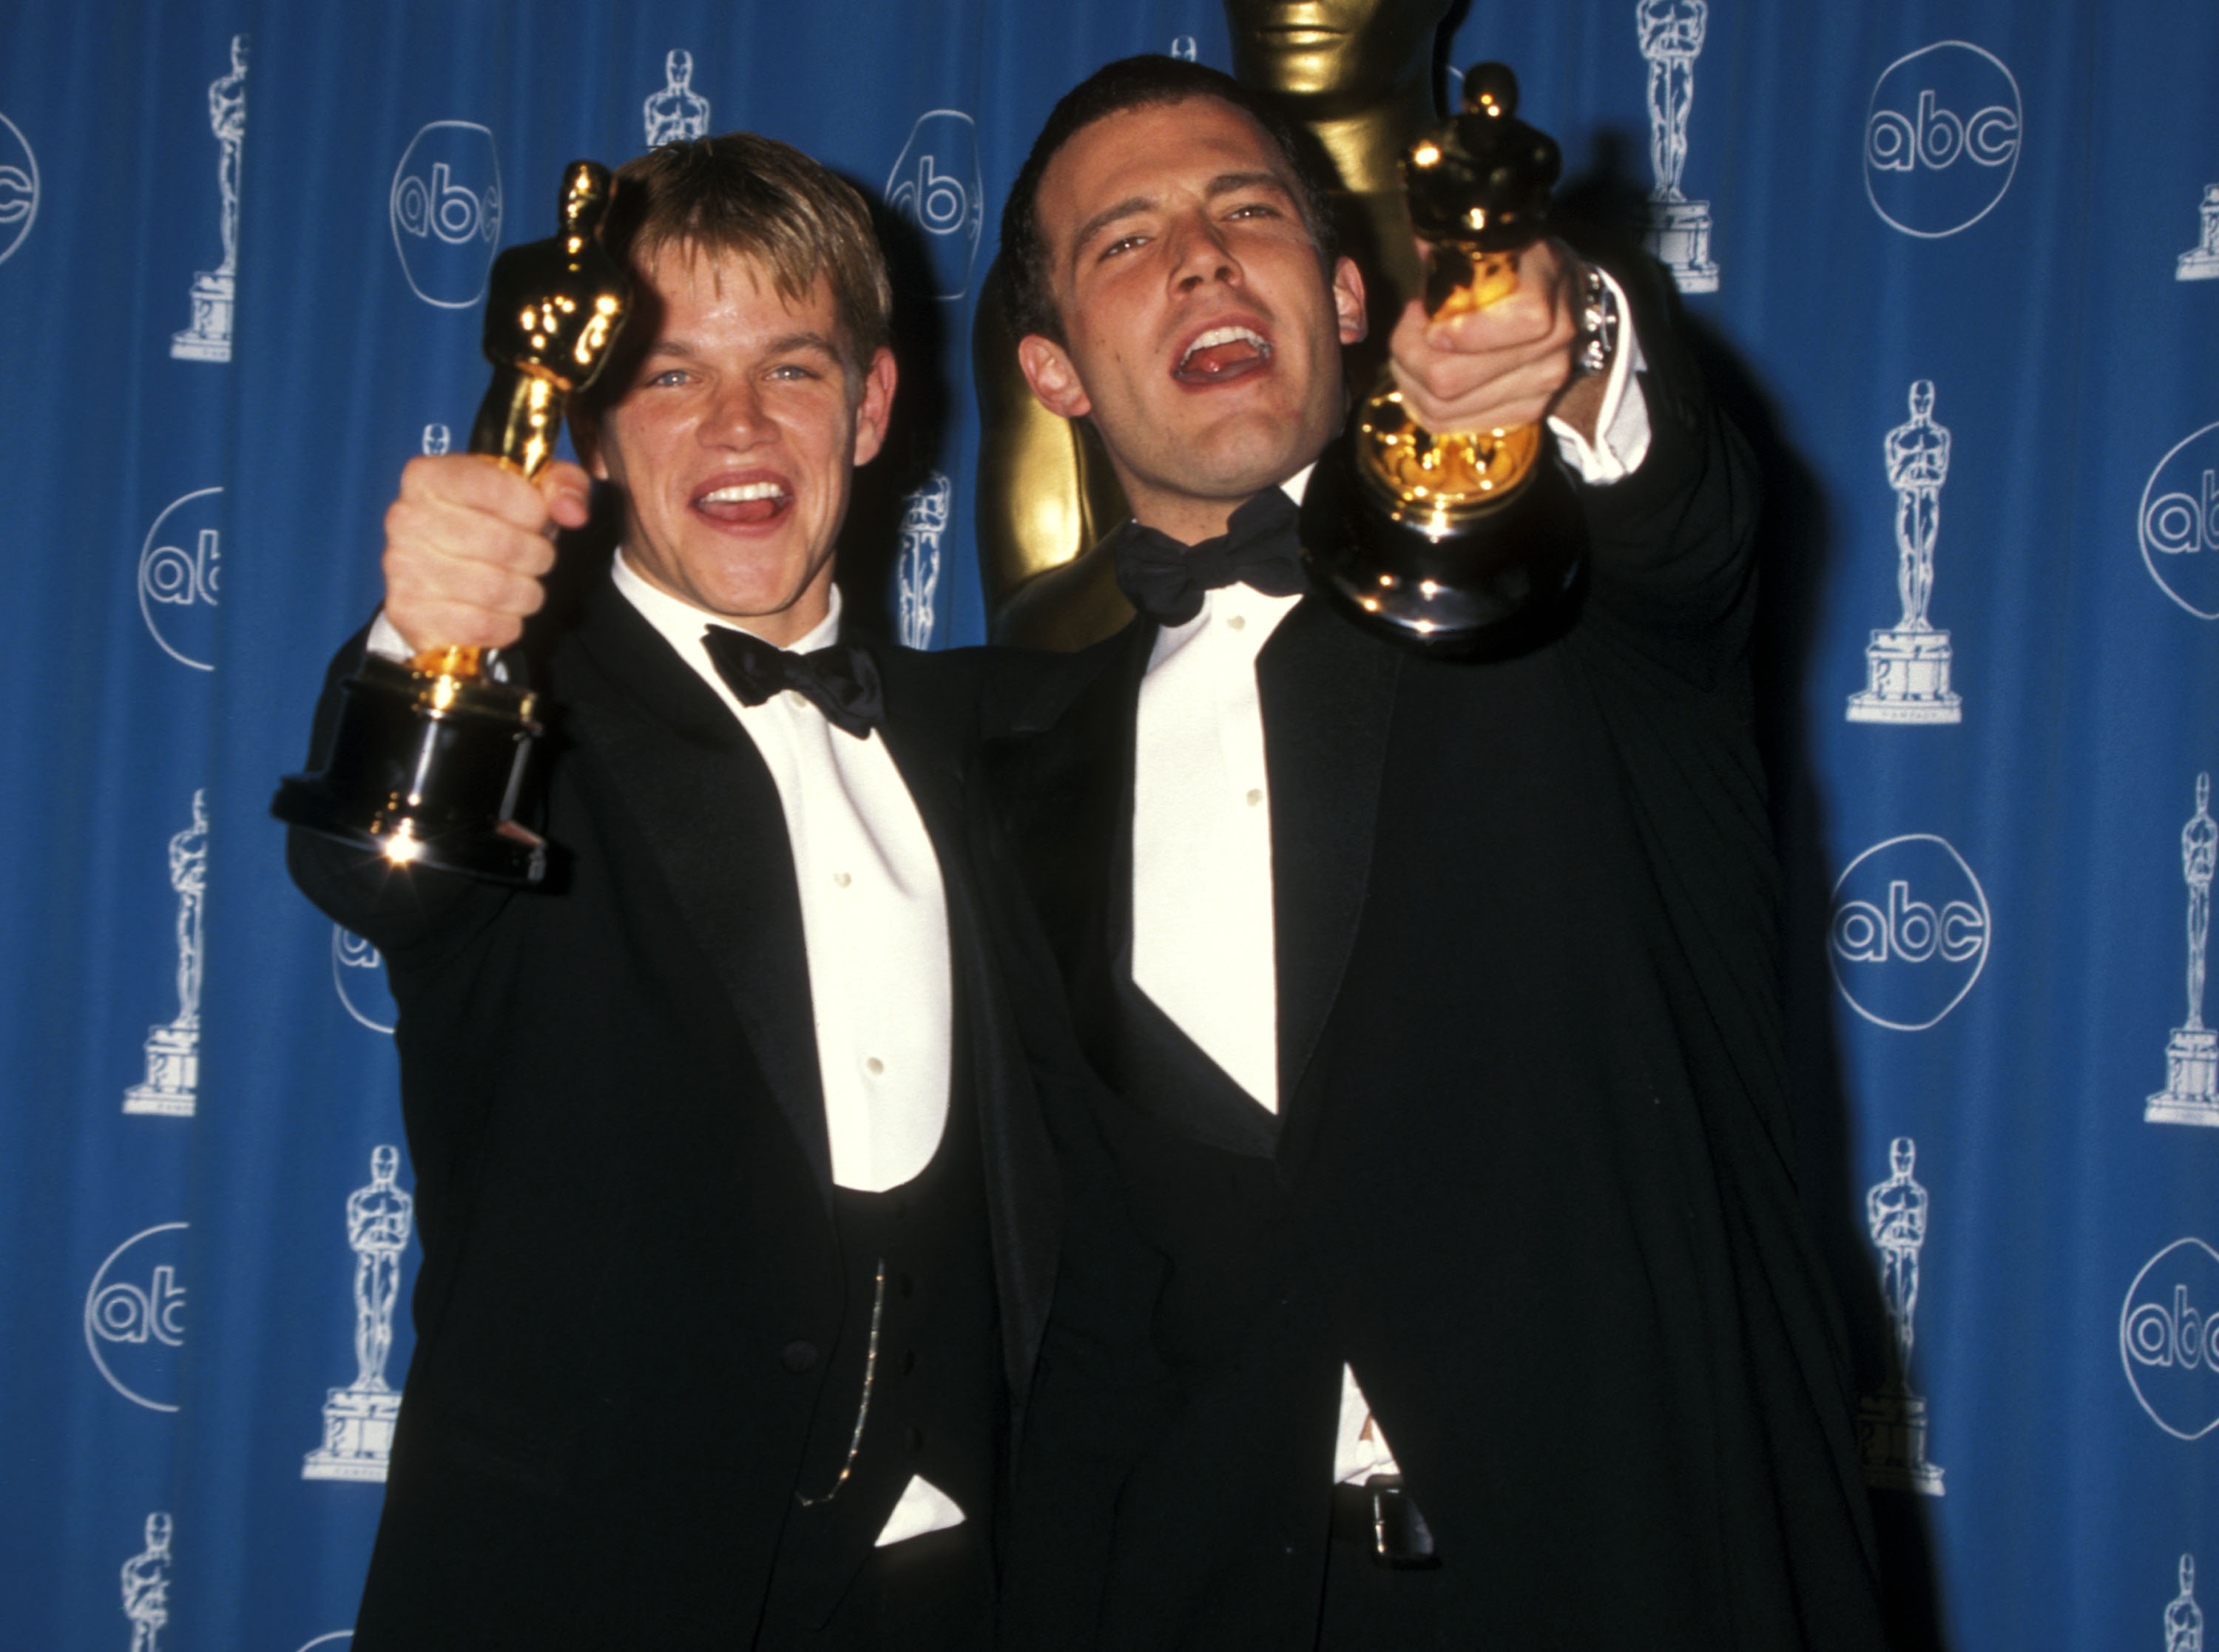 Matt Damon and Ben Affleck smiling and holding their Oscars for 'Good Will Hunting'